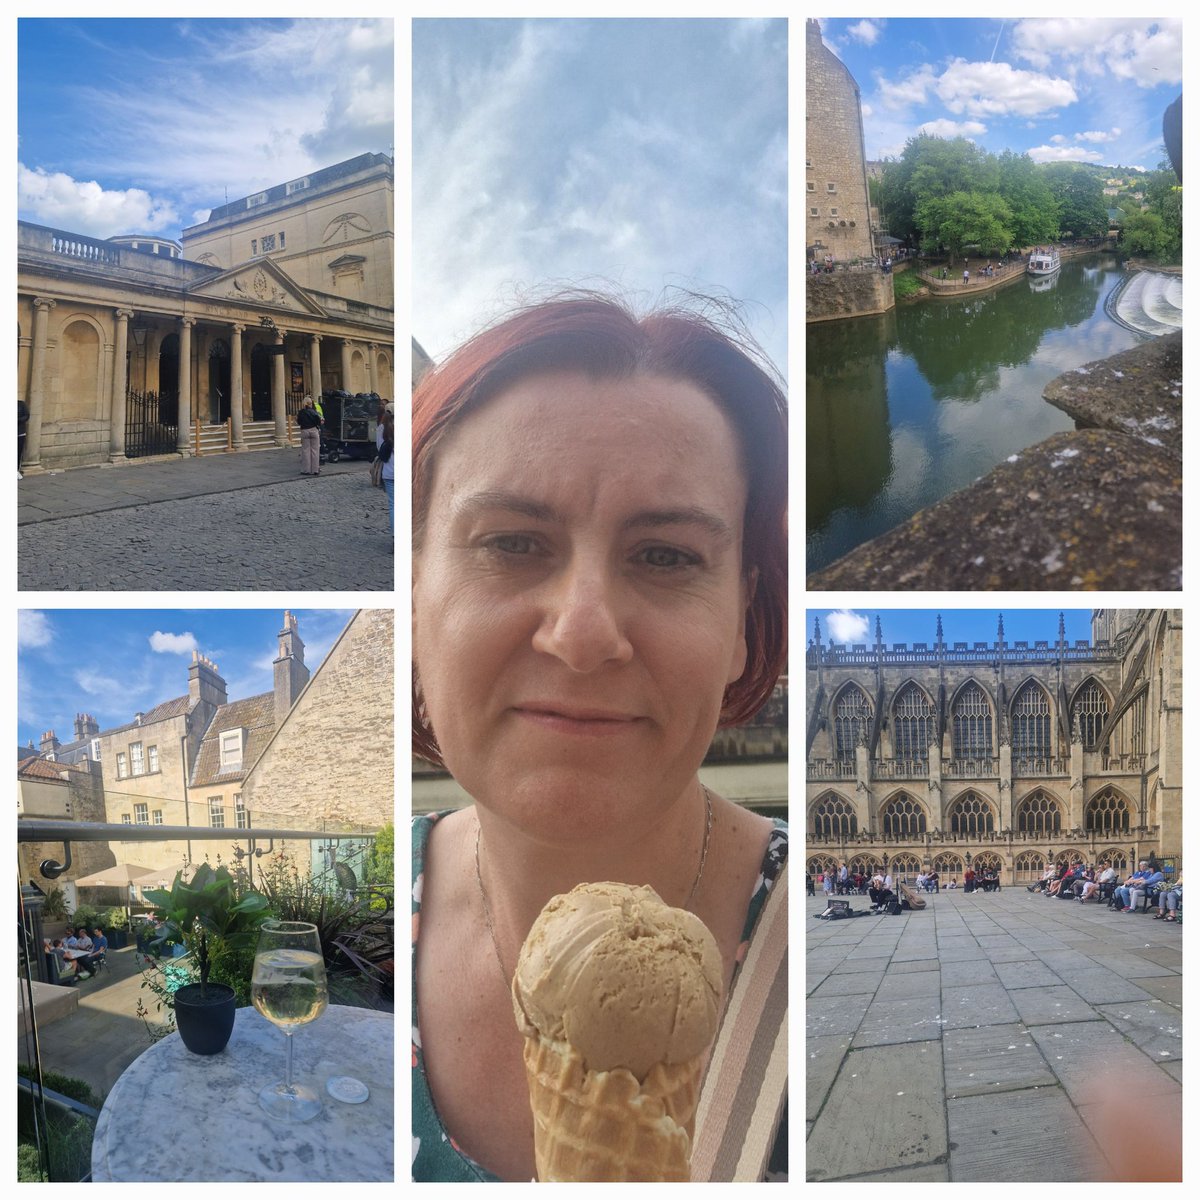 Not fussed with the football ⚽️ had a little wander round Bath, got a couple of dresses in charity shops and a necklace the market. Had an ice cream 🍦 in the sun now sat on a cute terrace with a wine and soda #SaturdayVibes